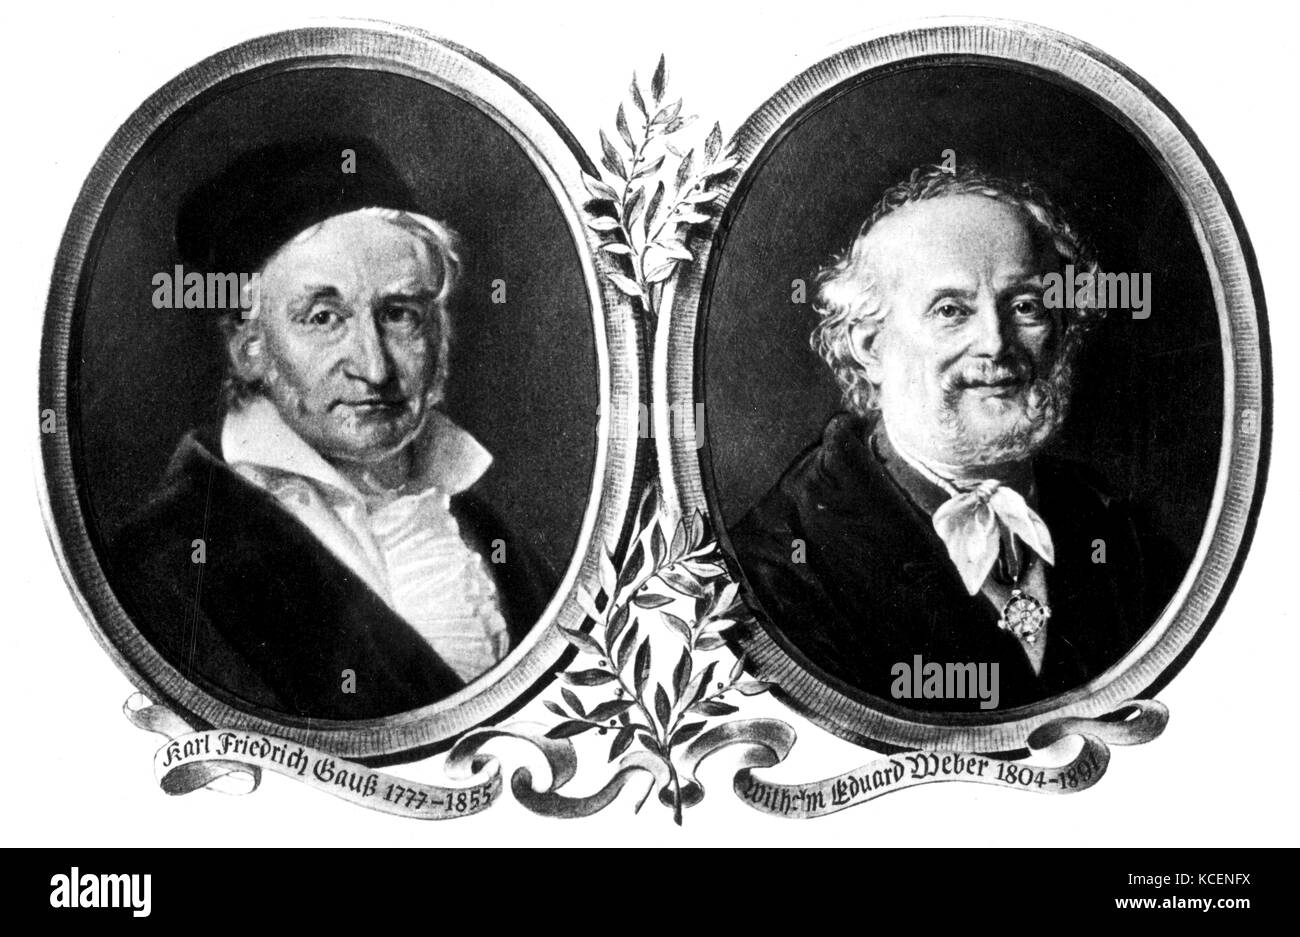 Portraits of Carl Friedrich Gauss (1777-1855) a German mathematician and Wilhelm Eduard Weber (1804-1891) a German physicist and inventor. Dated 19th Century Stock Photo